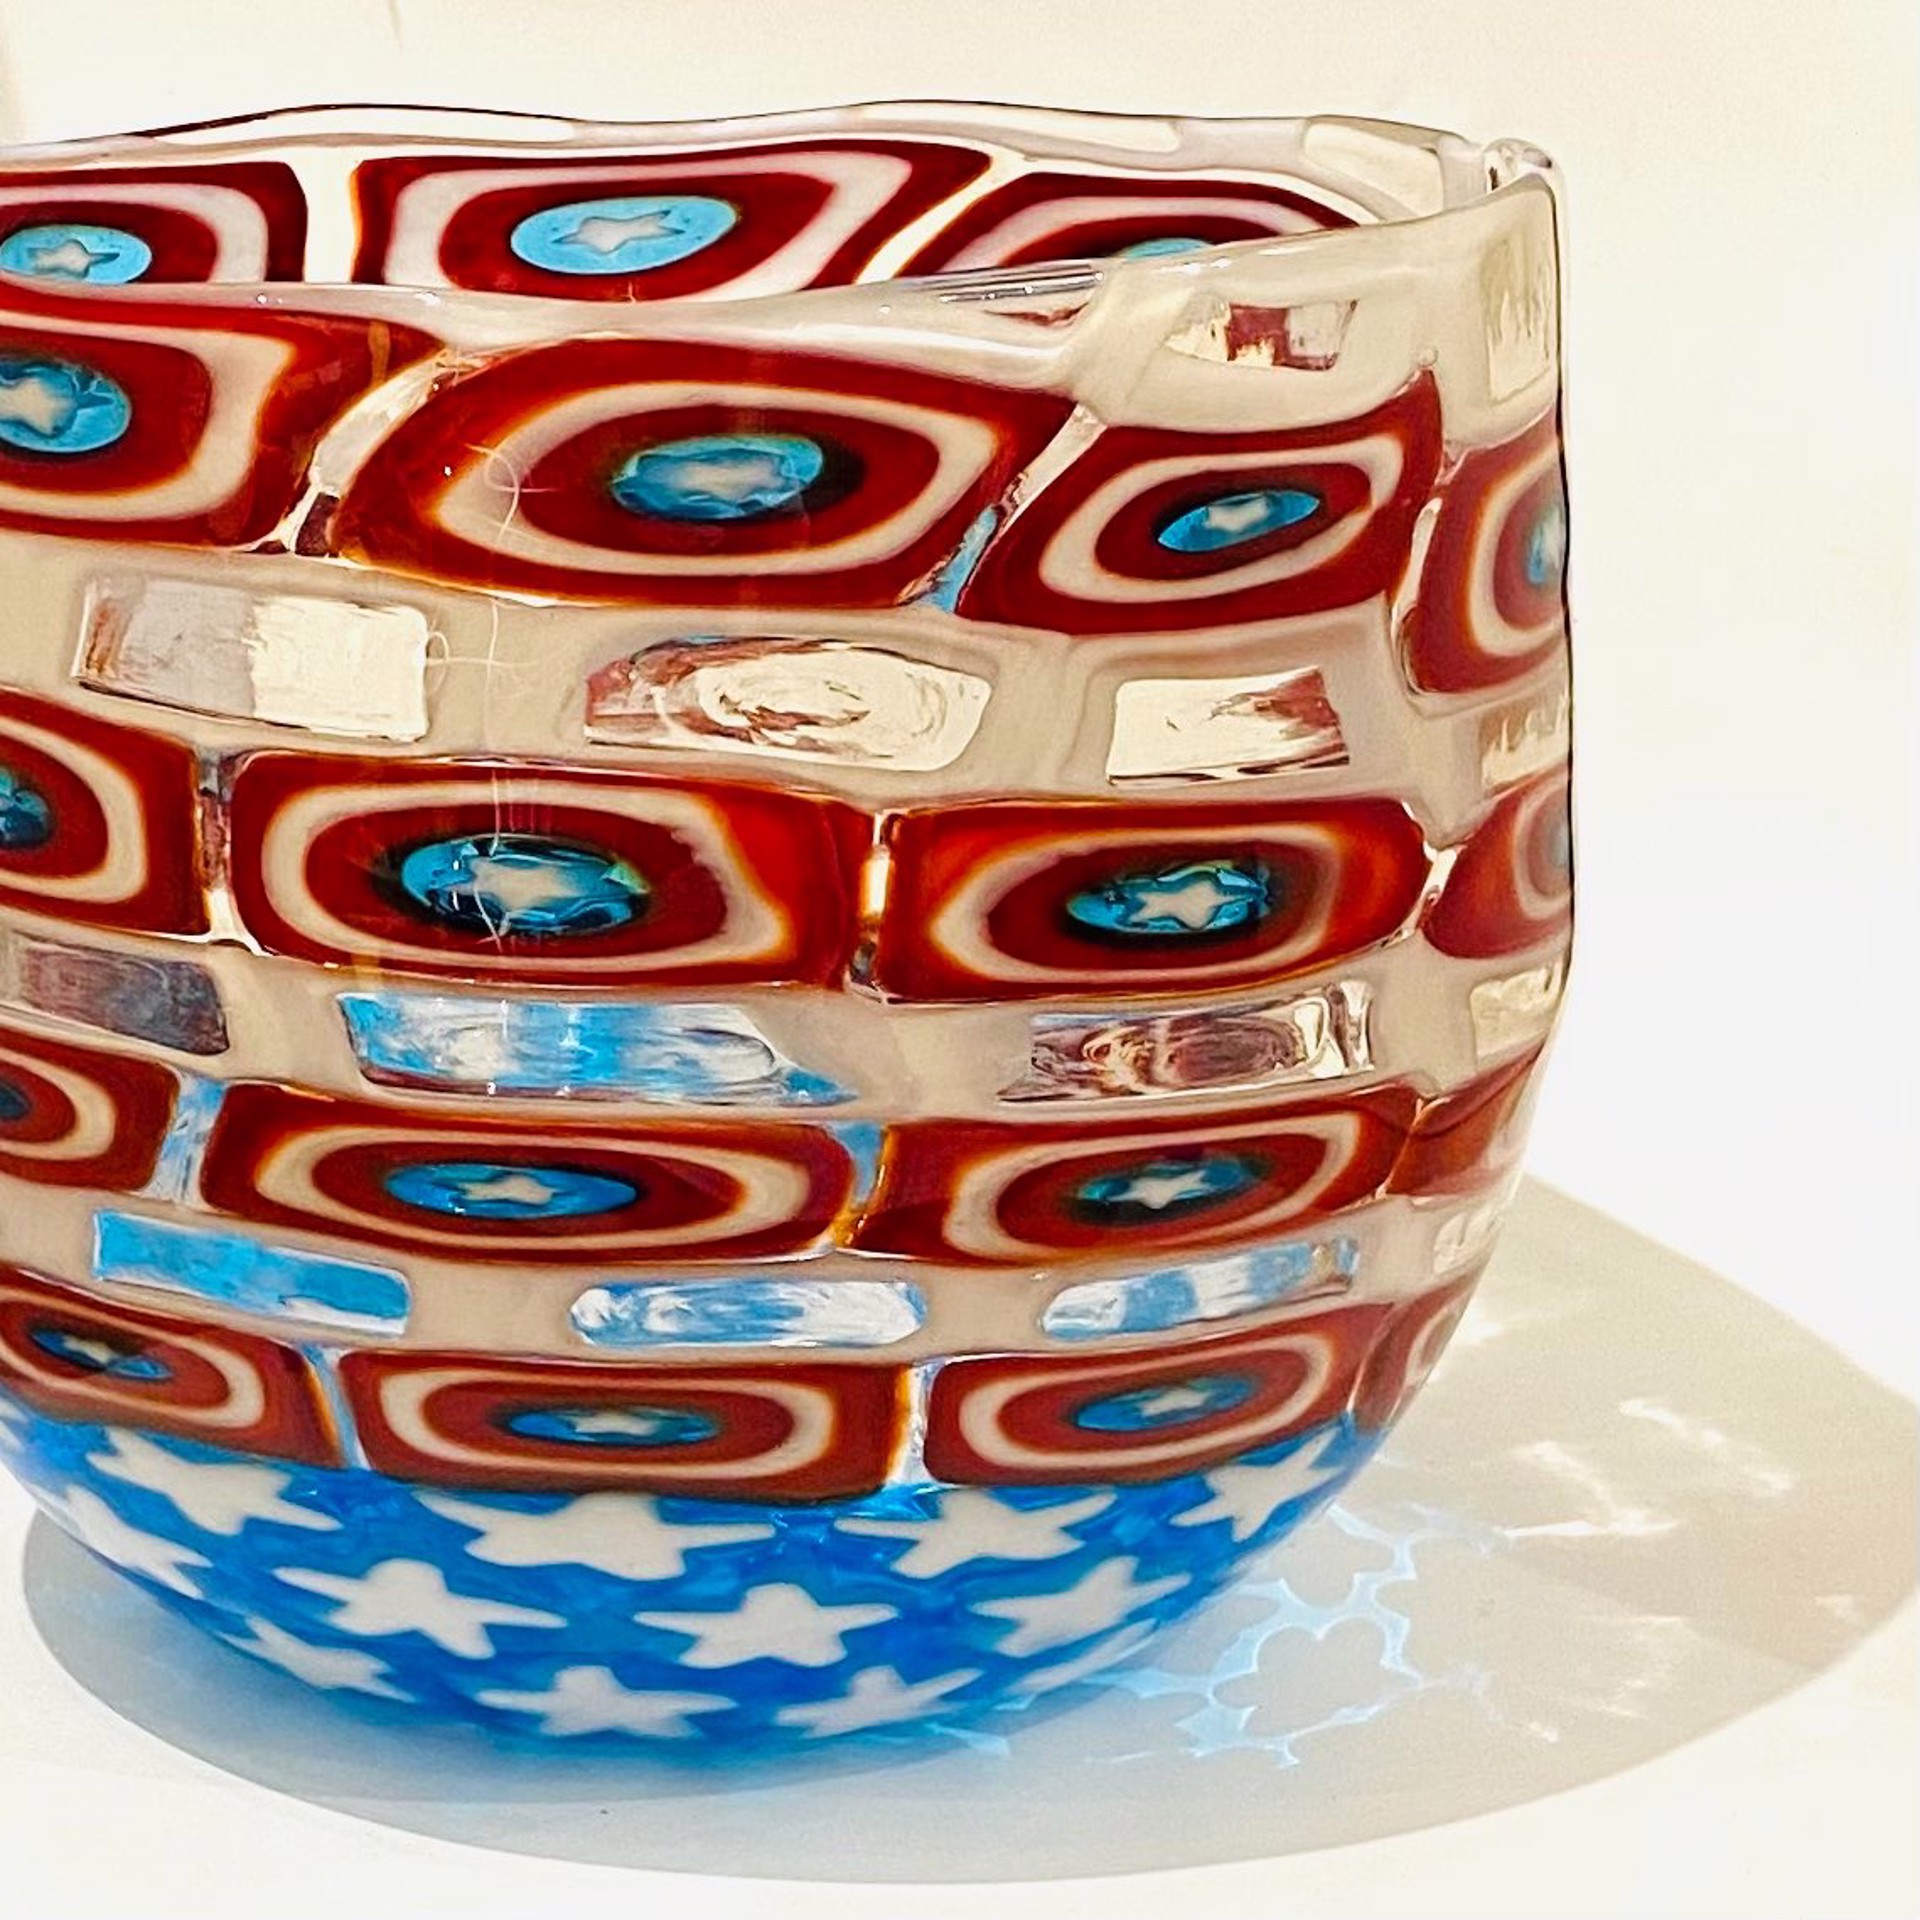 JG22-27 Bowl Red White Blue with Stars Millefiori by John Glass